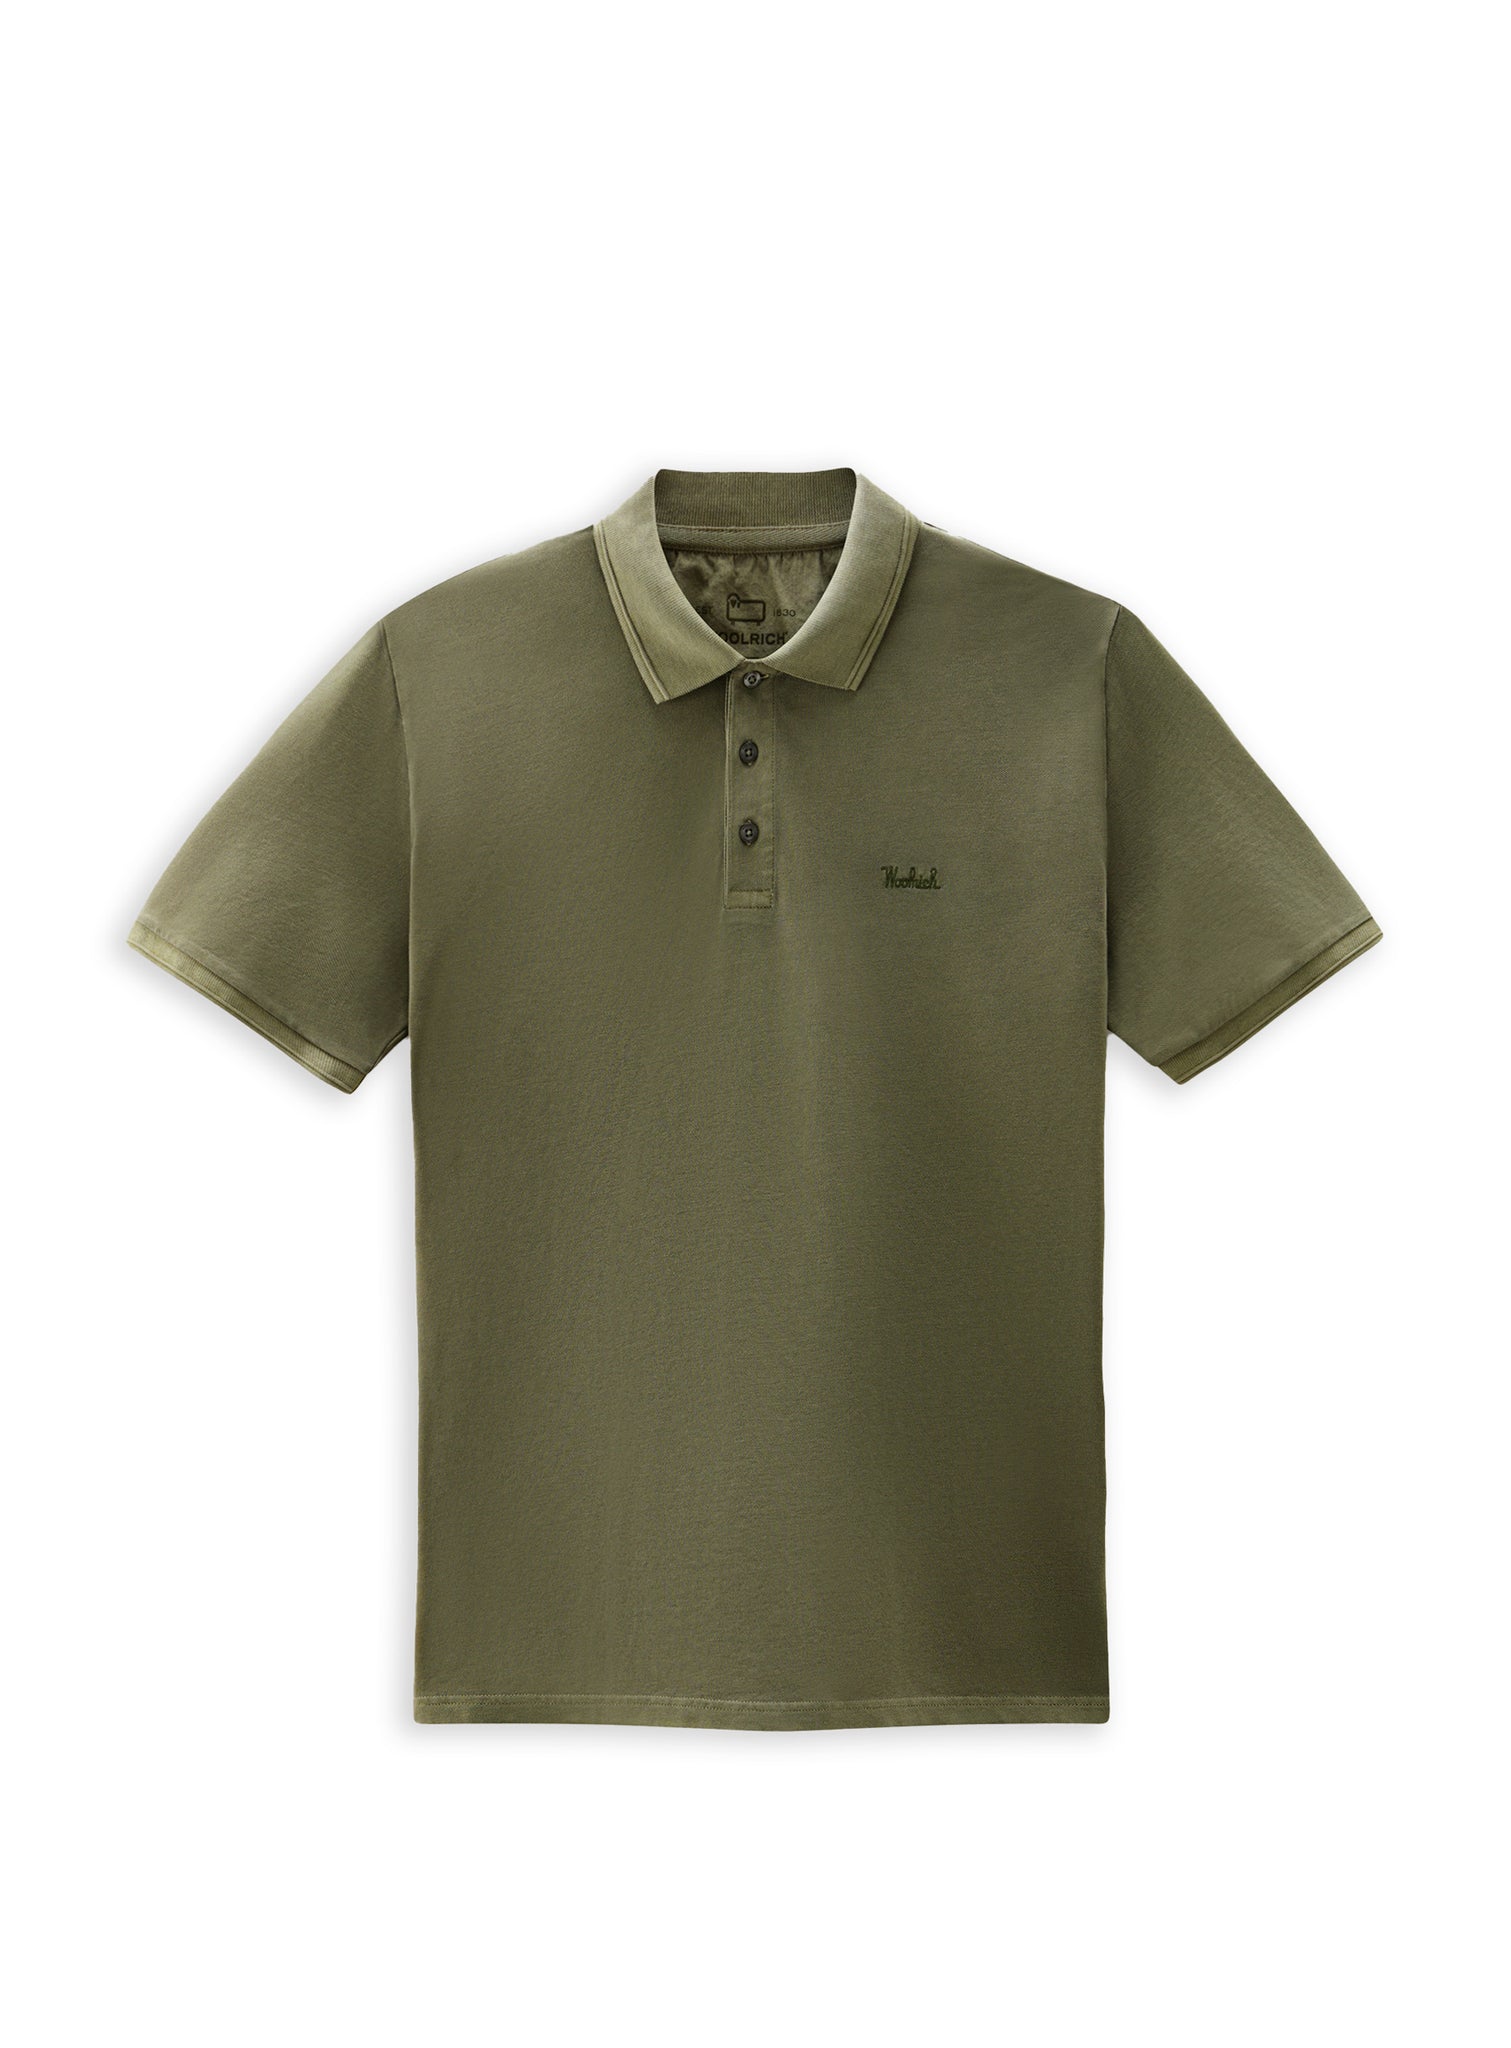 Woolrich Mackinack Dyed Cape Olive Green Men's Polo